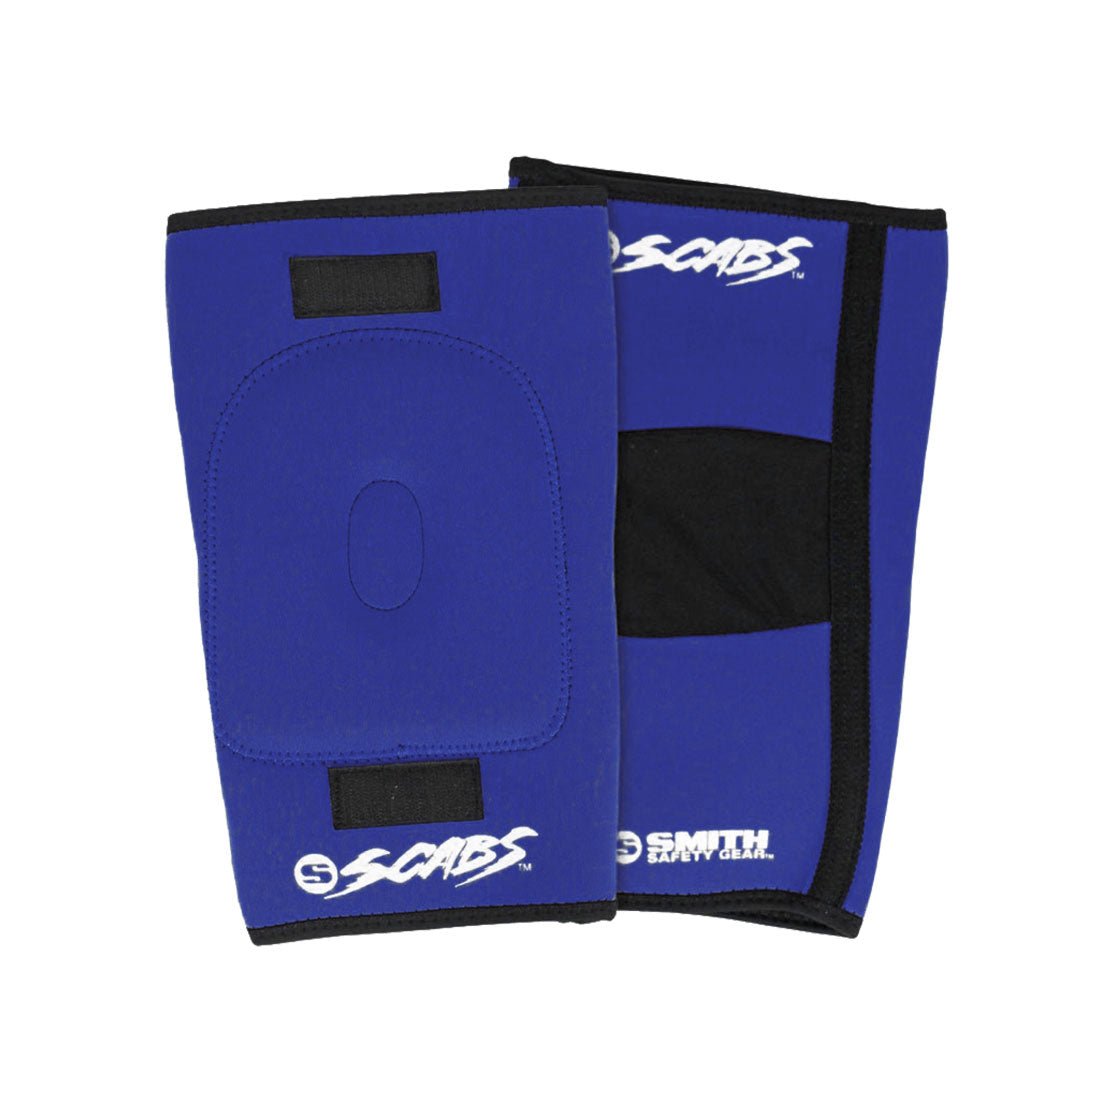 Smith Scabs Knee Gasket - Coloured Blue Protective Gear